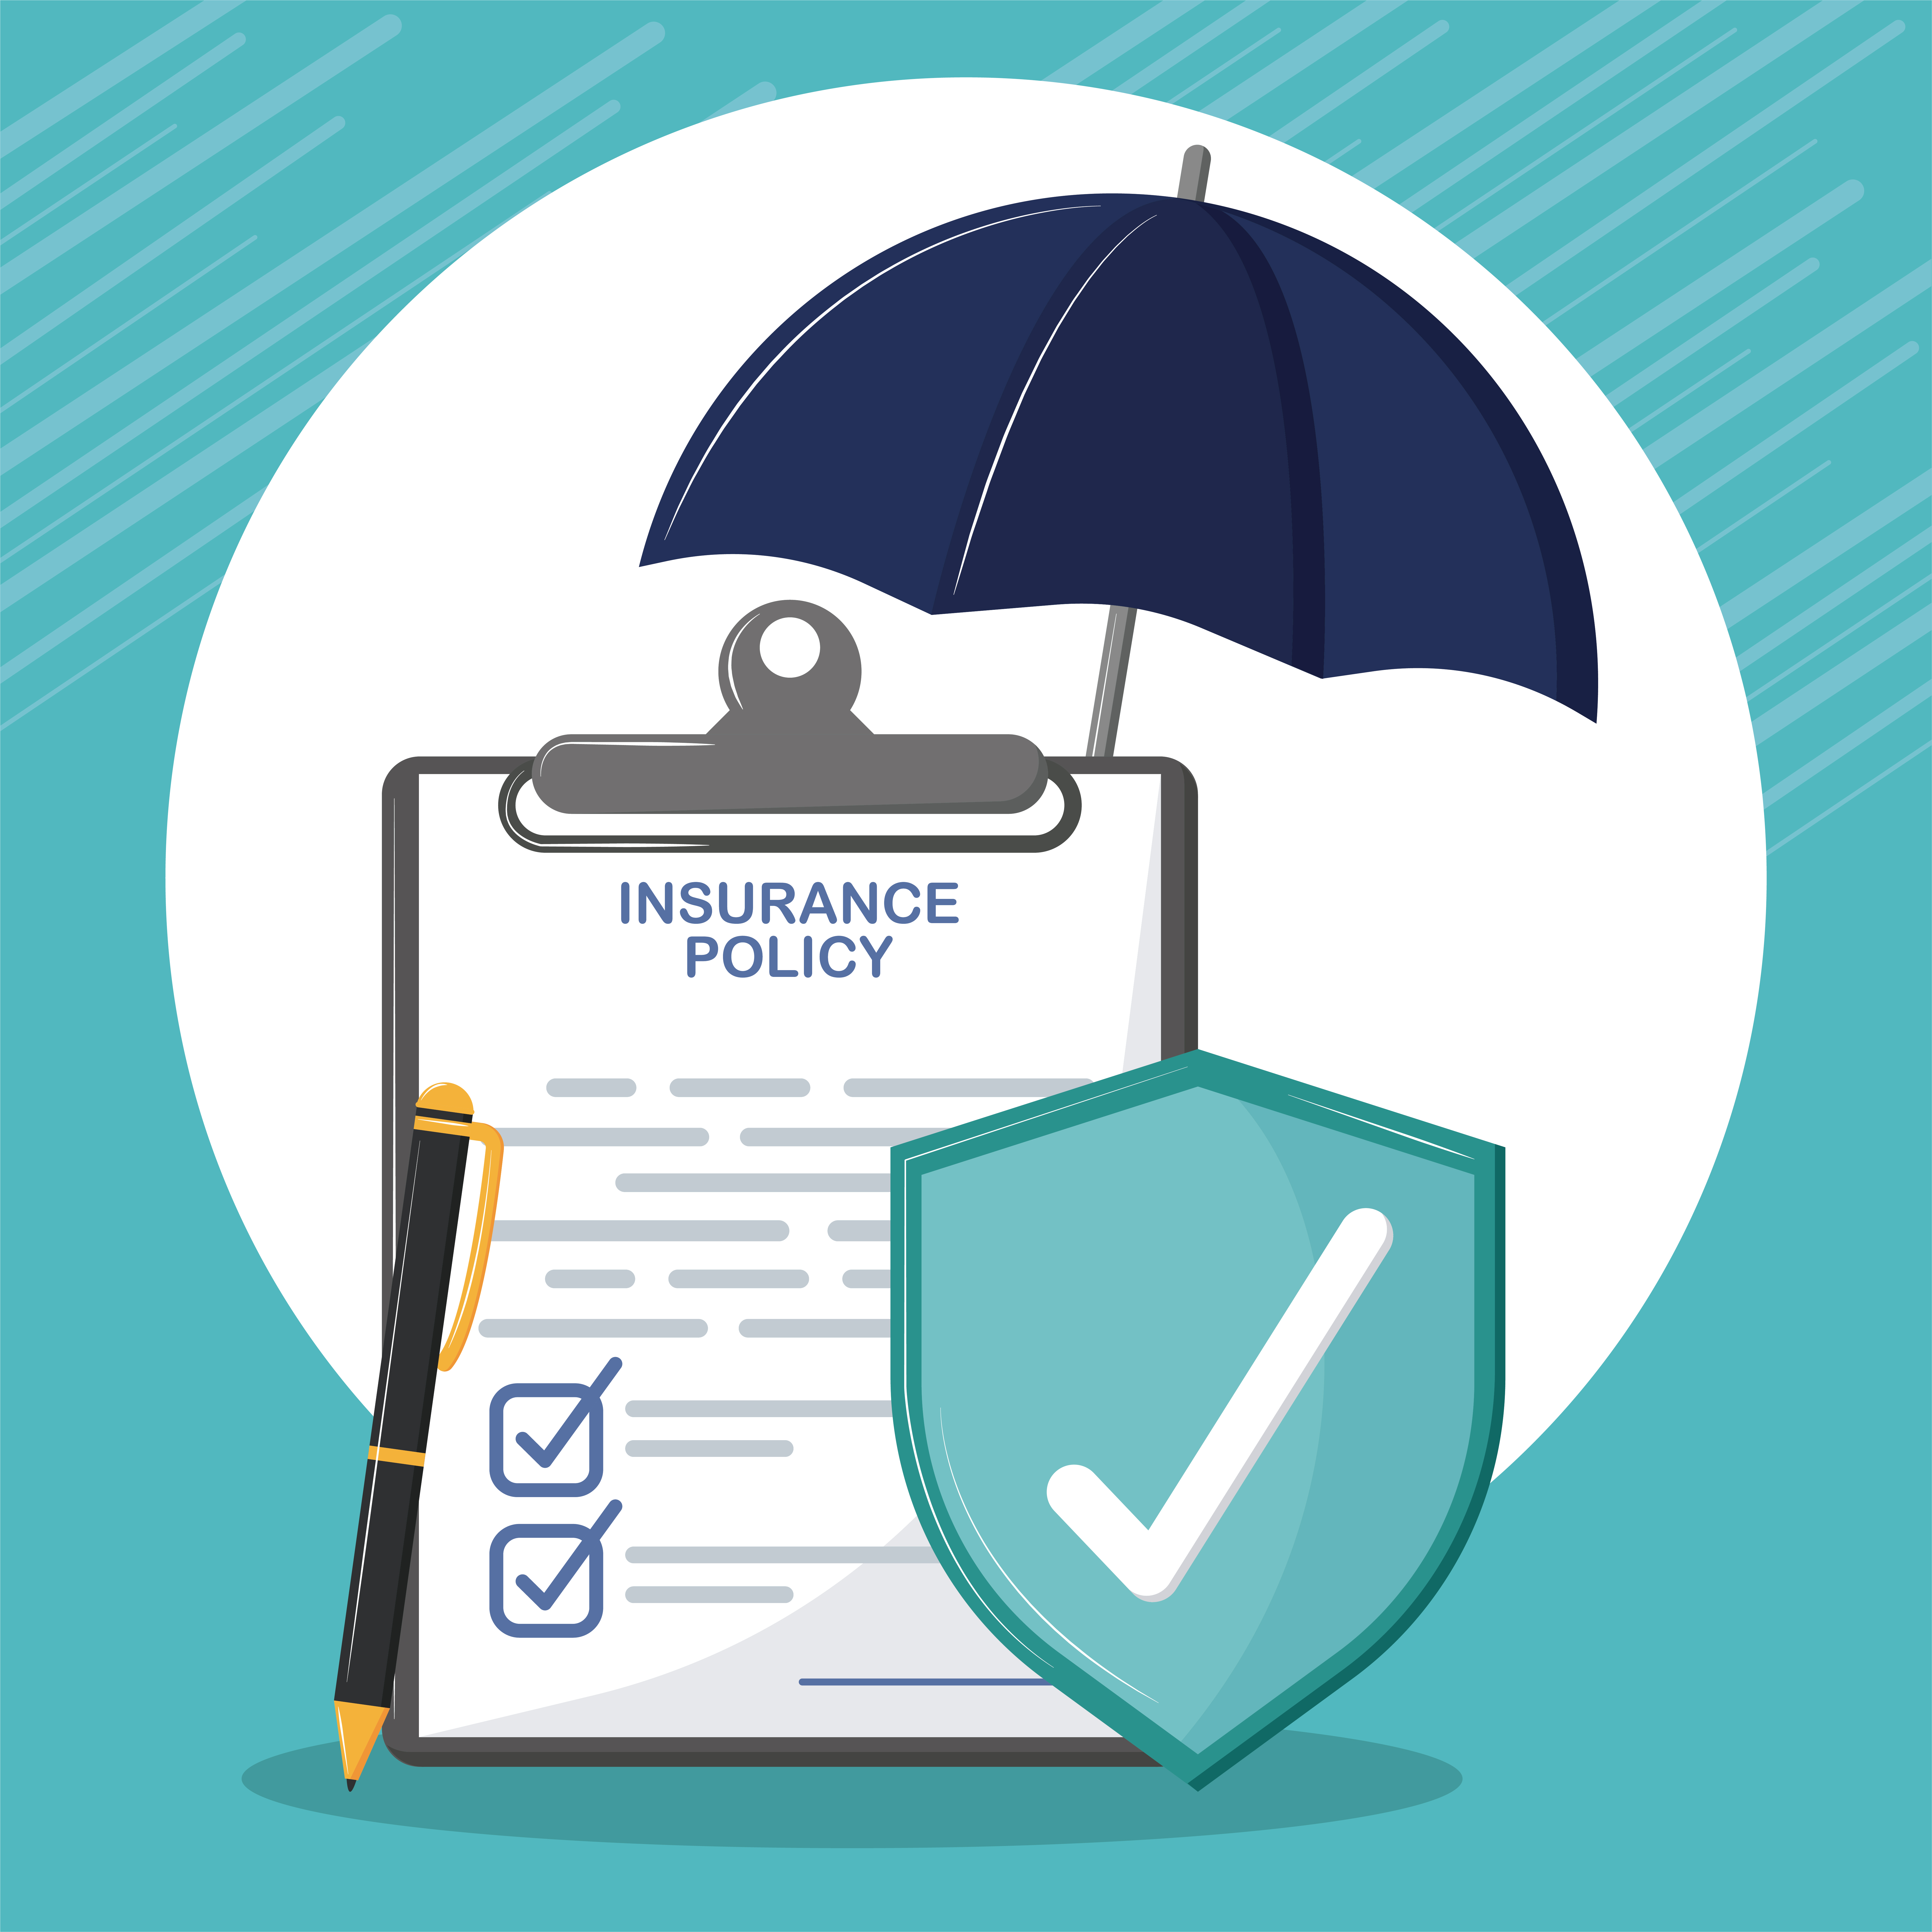 What Is Hospital Indemnity Insurance and How Does It Work?